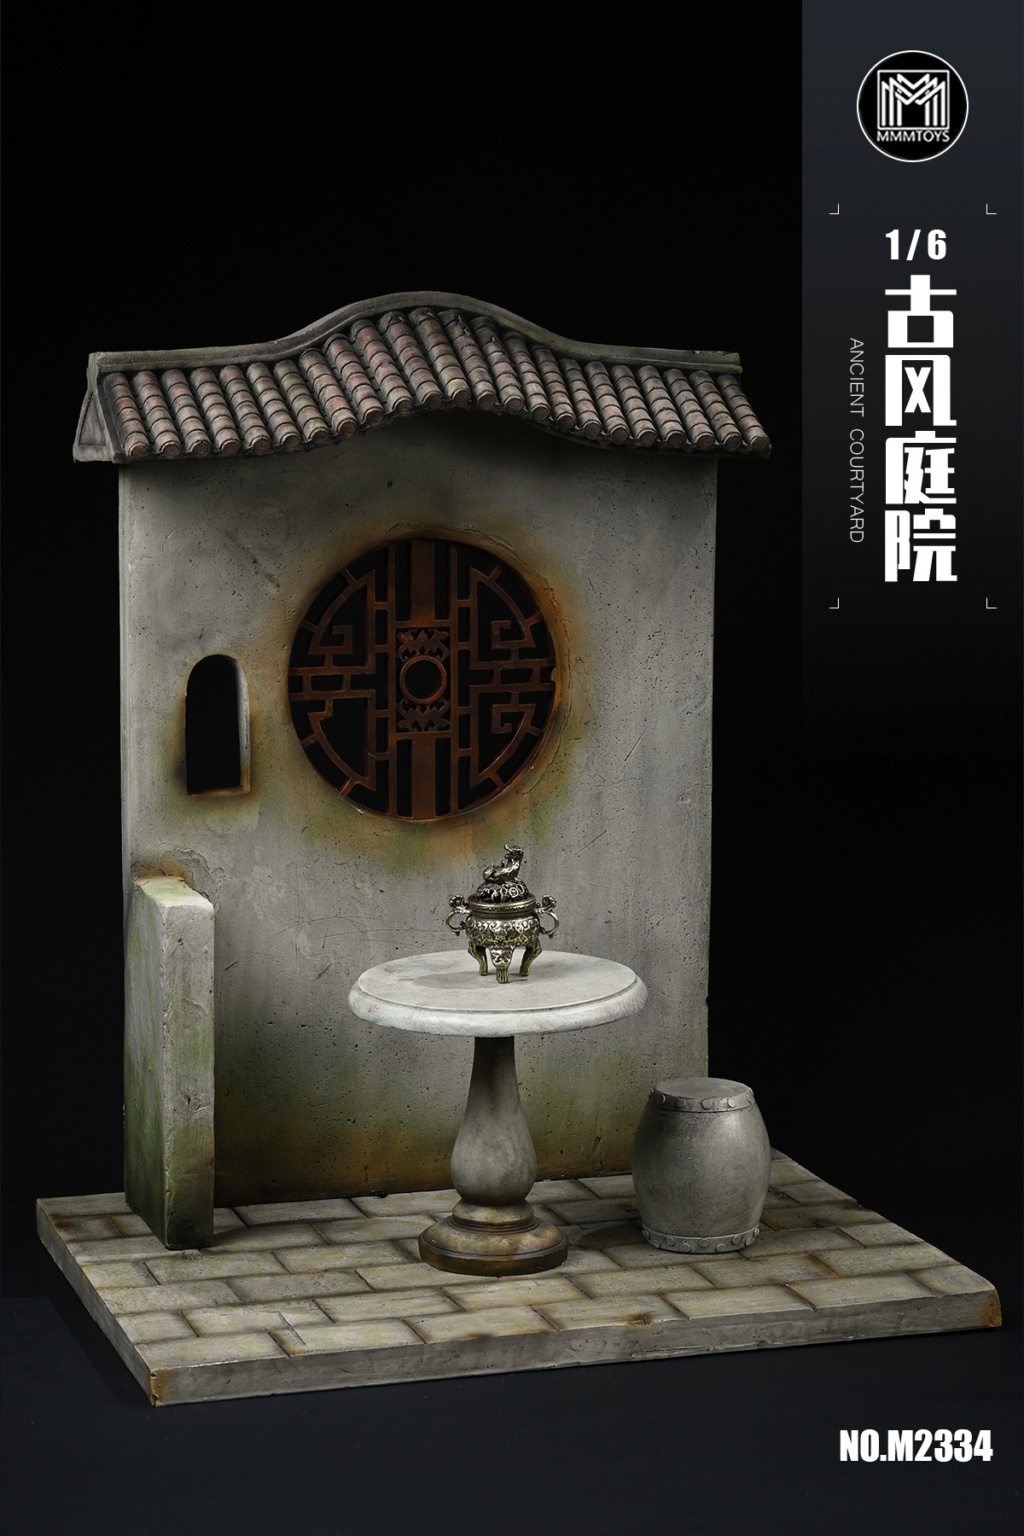 AncientCourtyard - NEW PRODUCT: MMMTOYS: 1/6 Ancient courtyard M2334 14152016